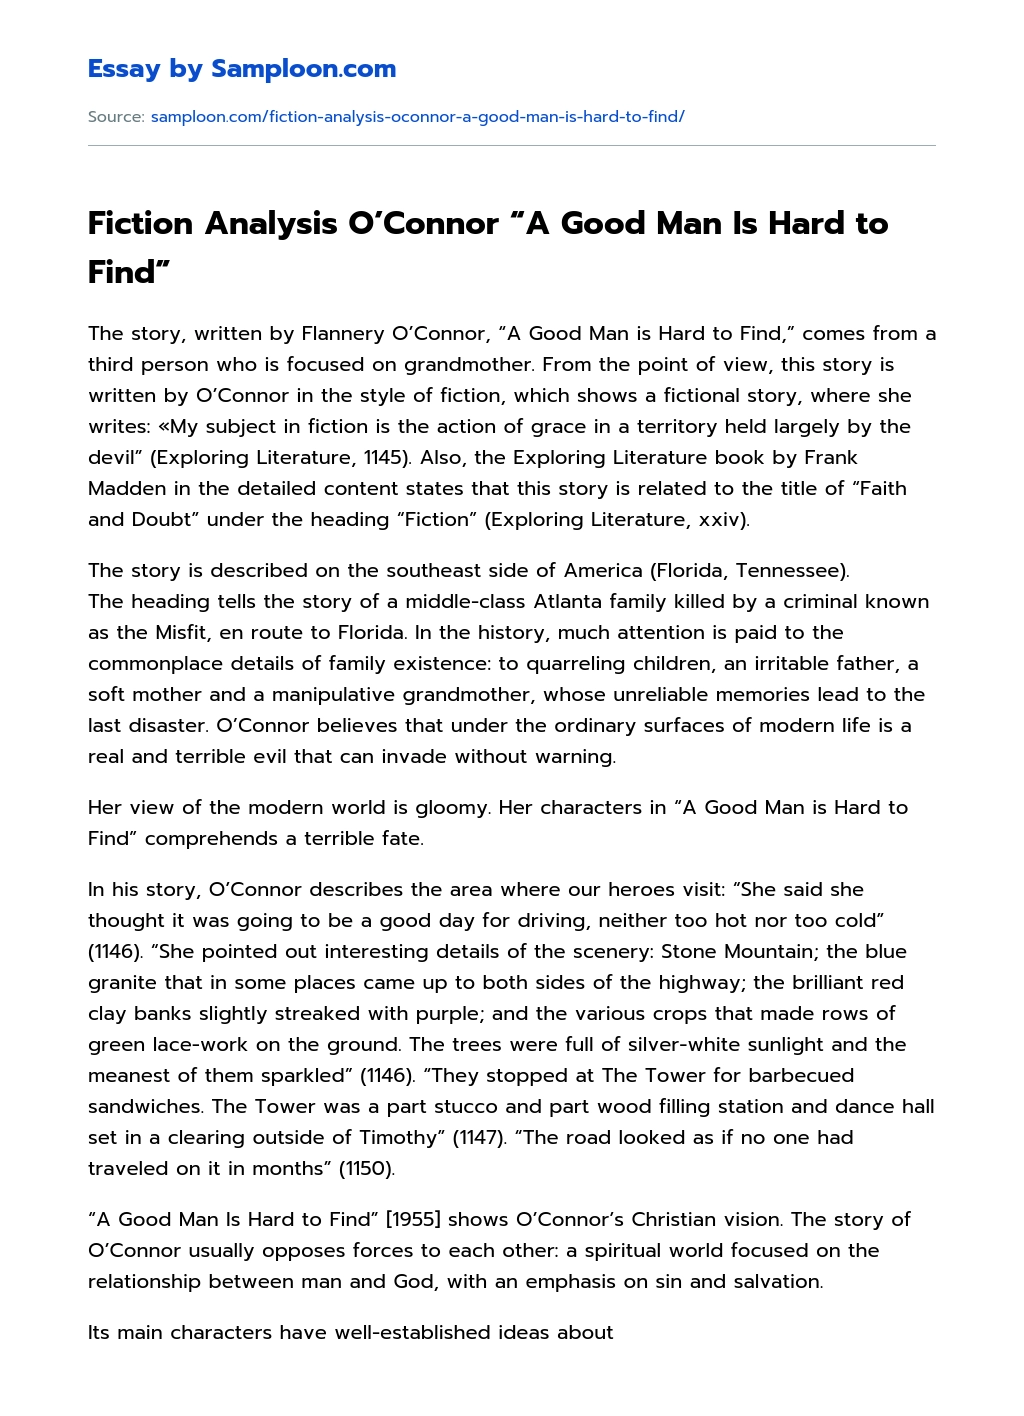 Fiction Analysis O’Connor “A Good Man Is Hard to Find” essay